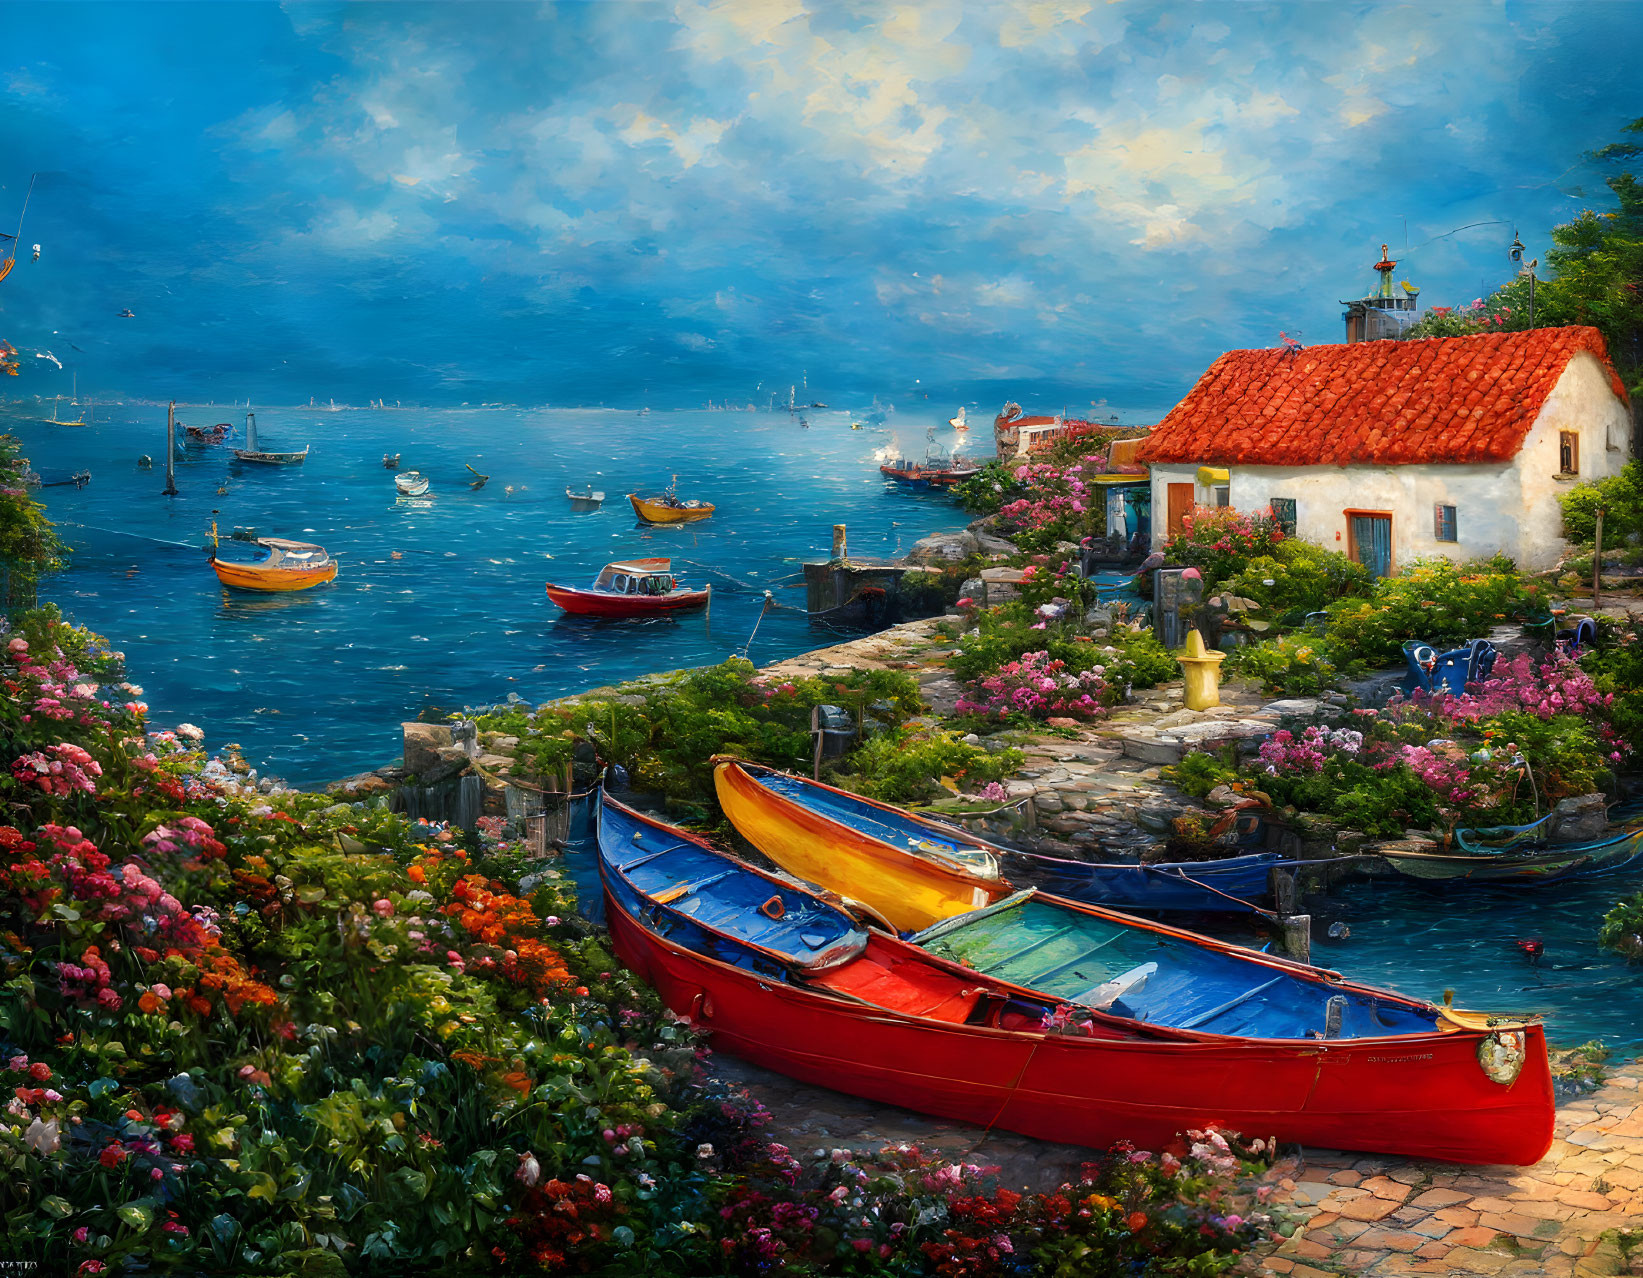 Colorful boats, quaint house, flowers by the shore under a blue sky